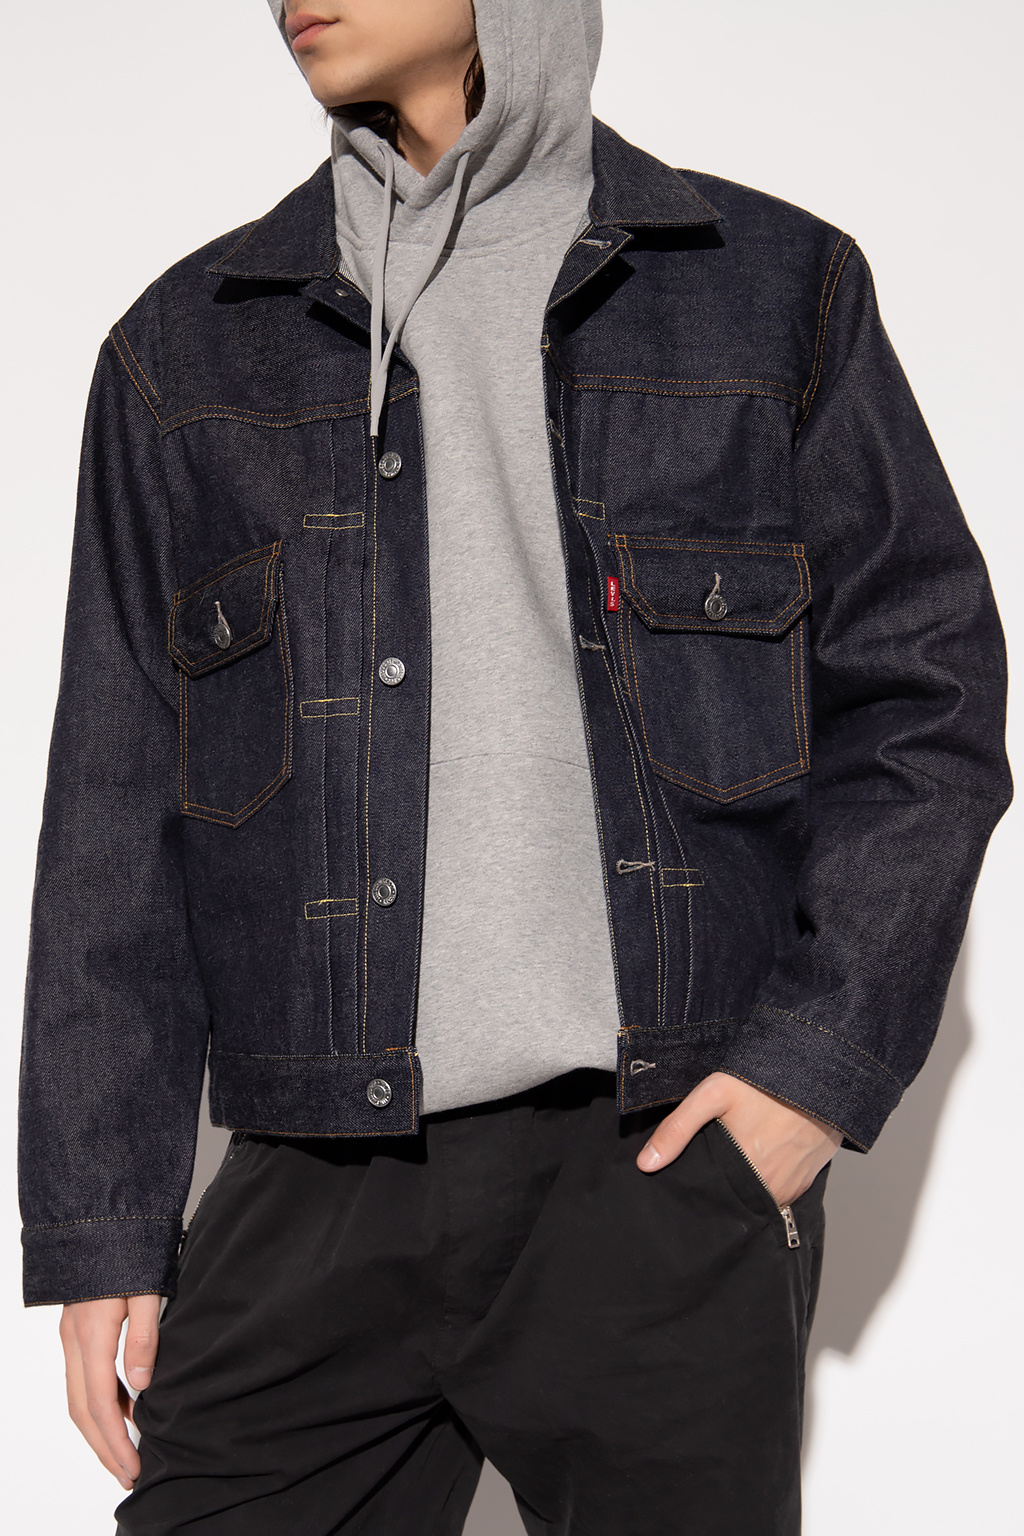 IetpShops | Men's ons Clothing | Levi's The 'Vintage ons Clothing